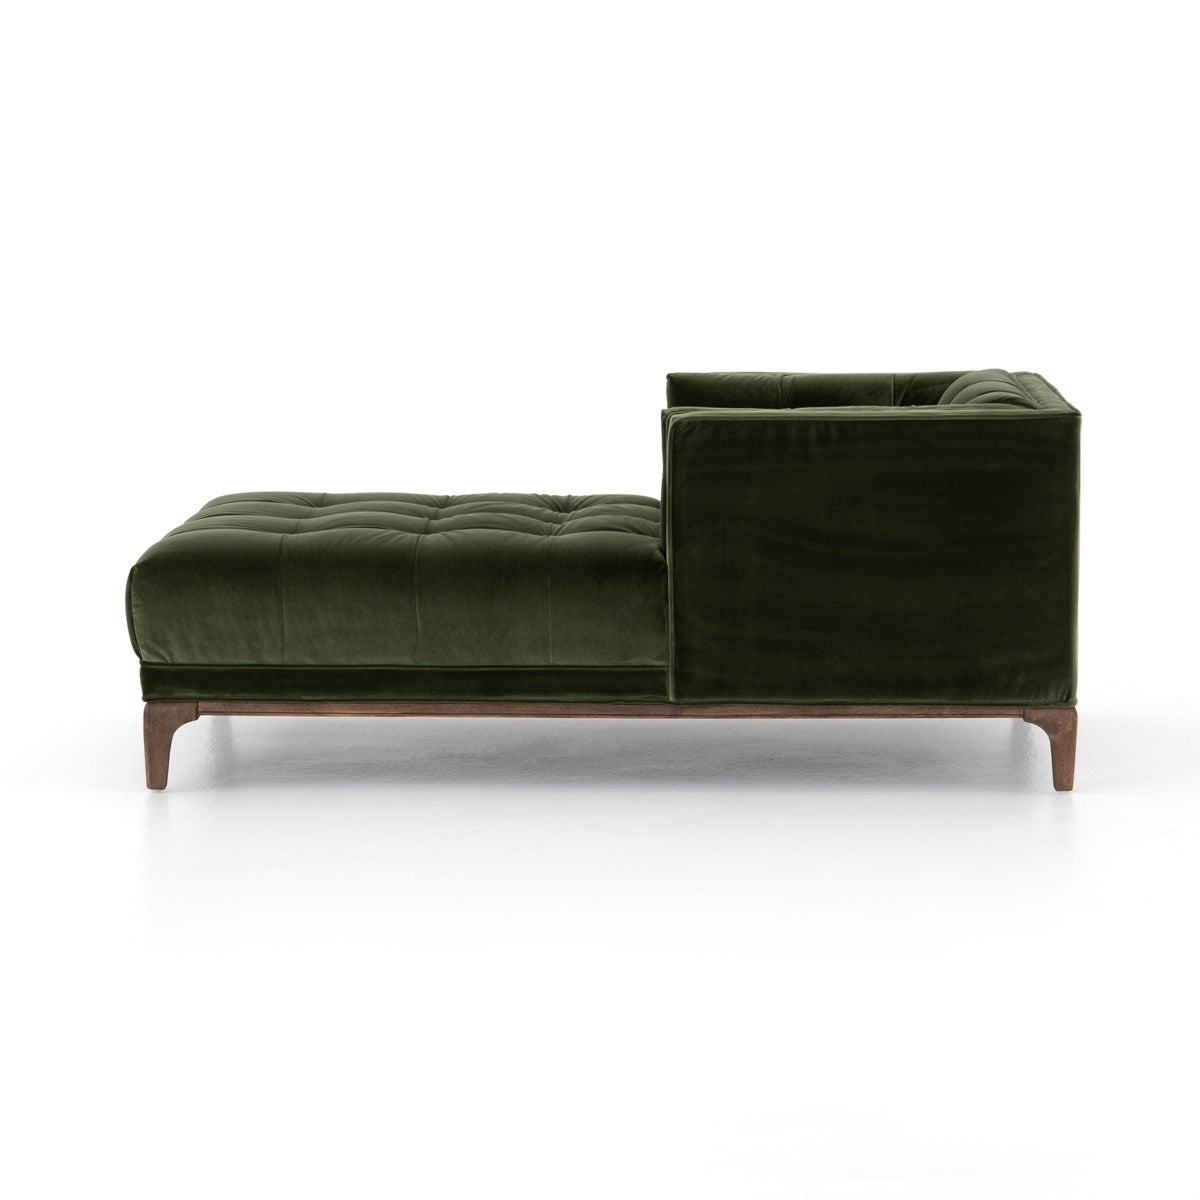 Load image into Gallery viewer, Dylan Chaise-Sapphire Olive Chaise Four Hands     Four Hands, Burke Decor, Mid Century Modern Furniture, Old Bones Furniture Company, Old Bones Co, Modern Mid Century, Designer Furniture, https://www.oldbonesco.com/
